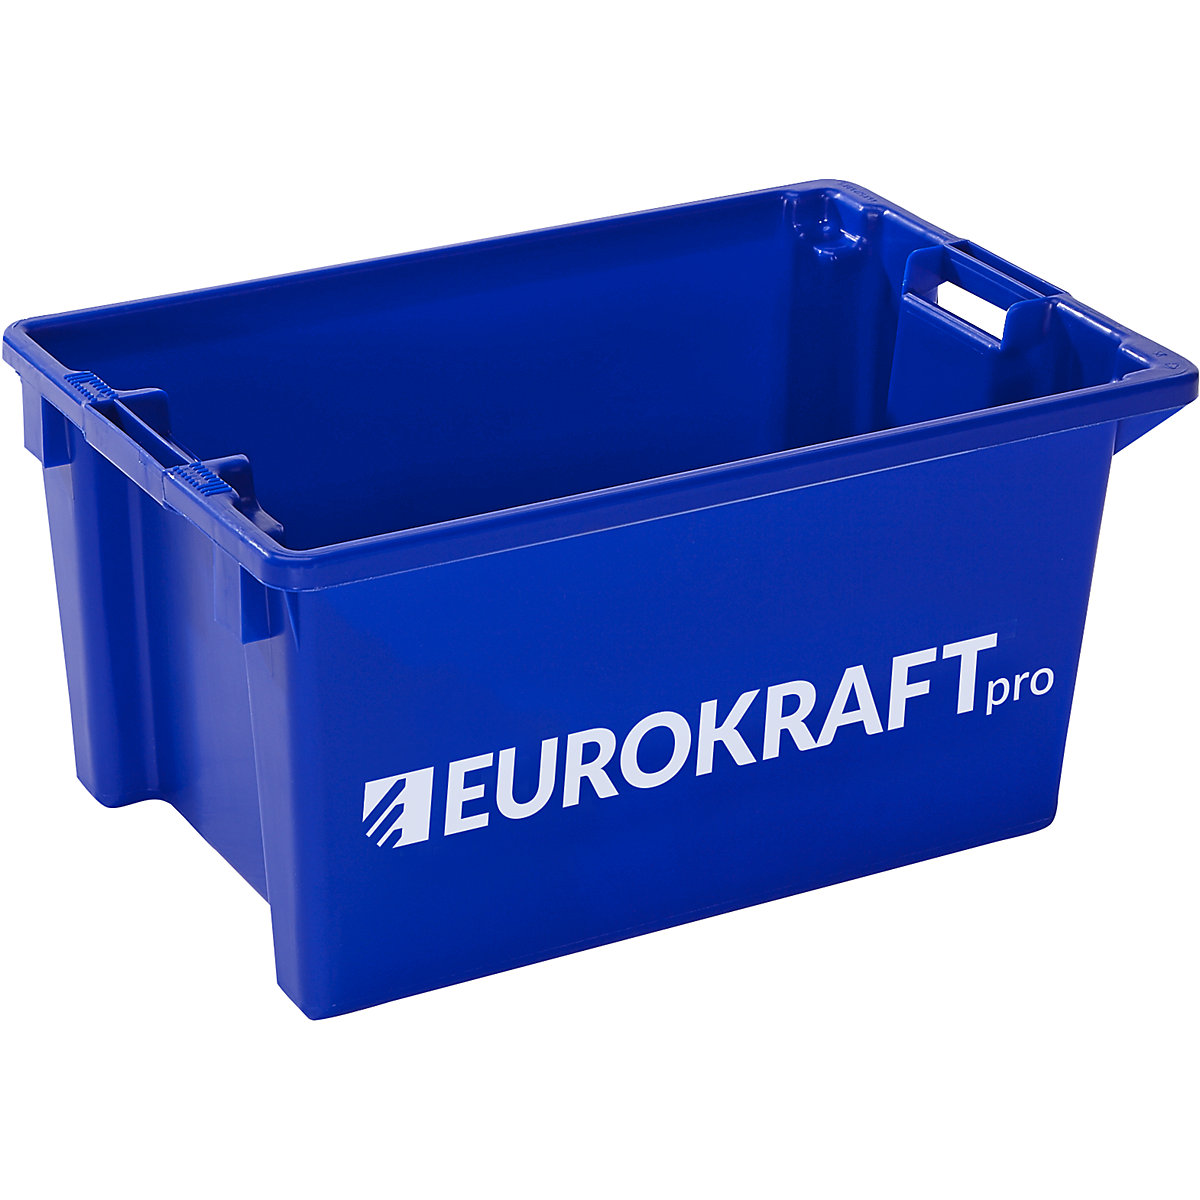 Stack/nest container – eurokraft pro